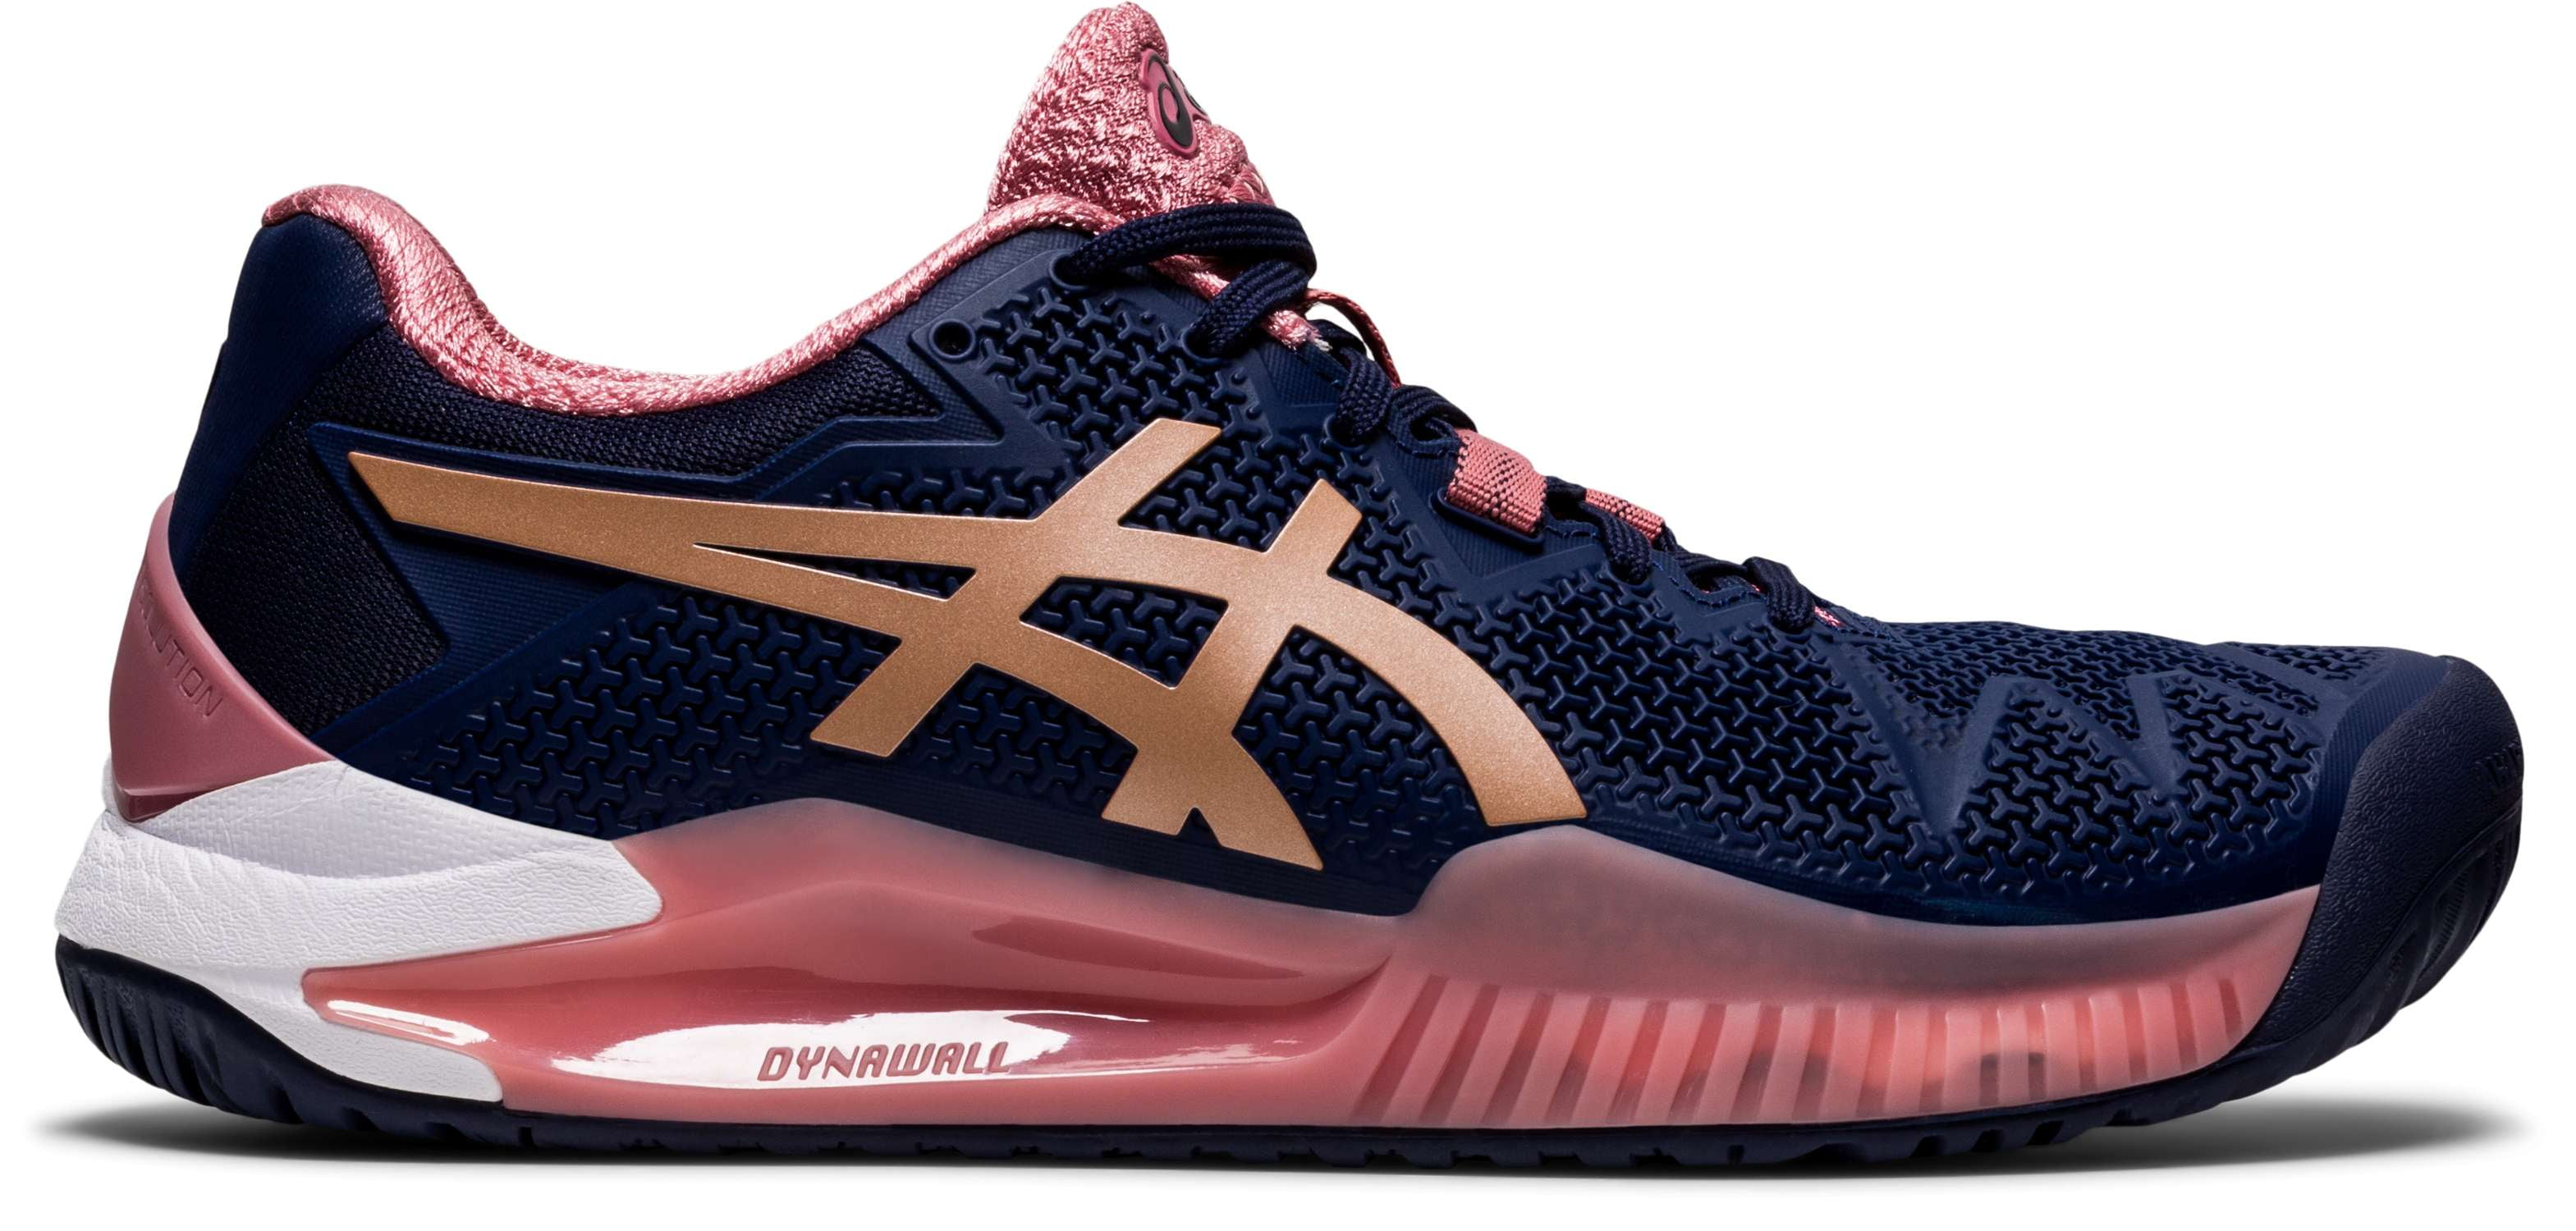 Asics Women's  Gel-Resolution 8 Tennis Shoes In Peacoat/Rose Gold - Tennis Shoes - ASICS - ATR Sports